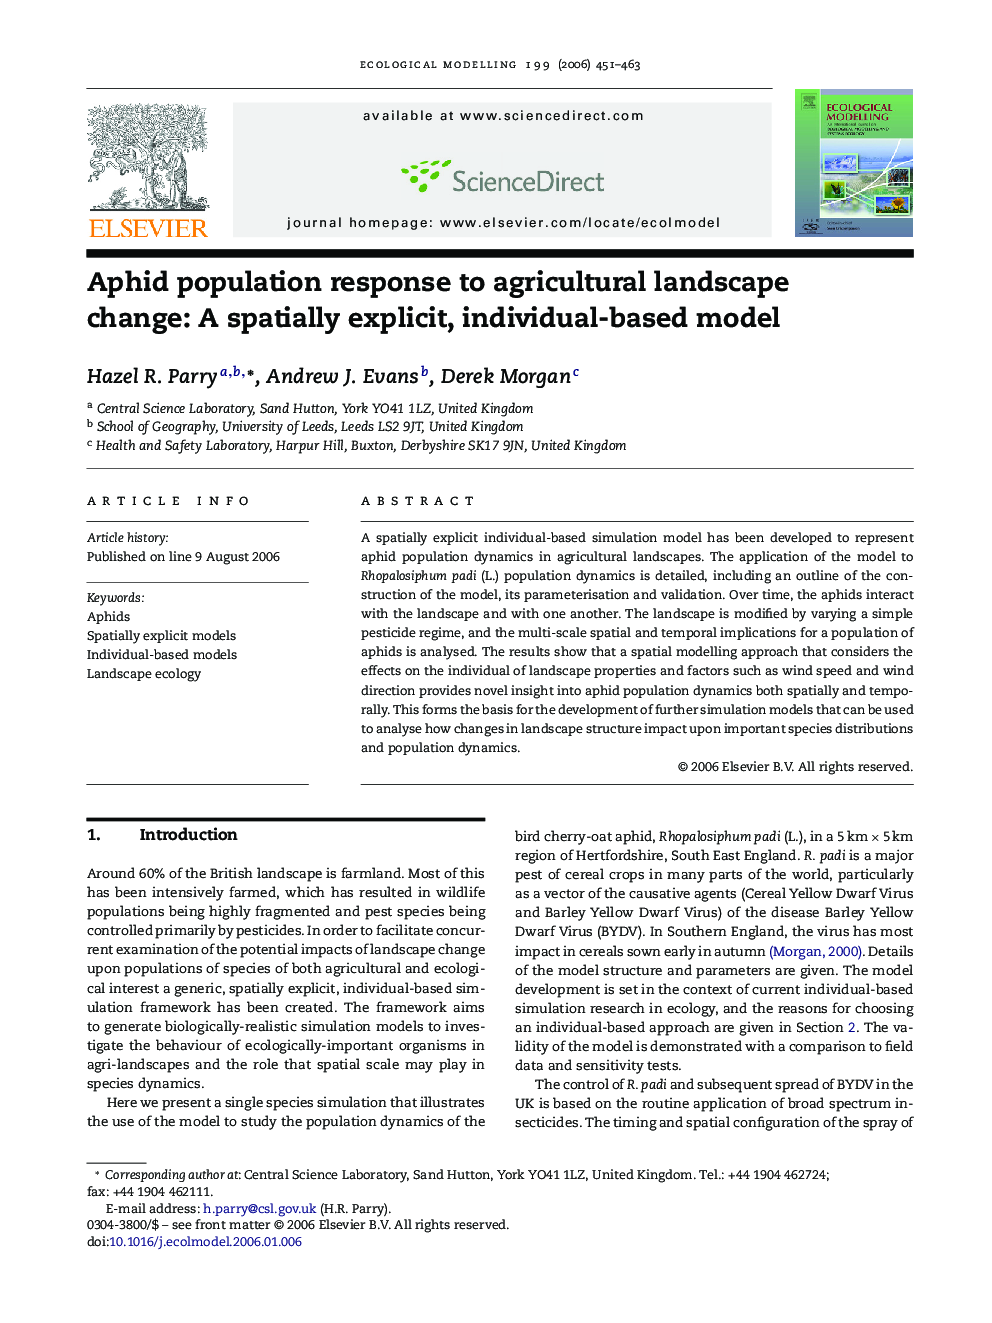 Aphid population response to agricultural landscape change: A spatially explicit, individual-based model